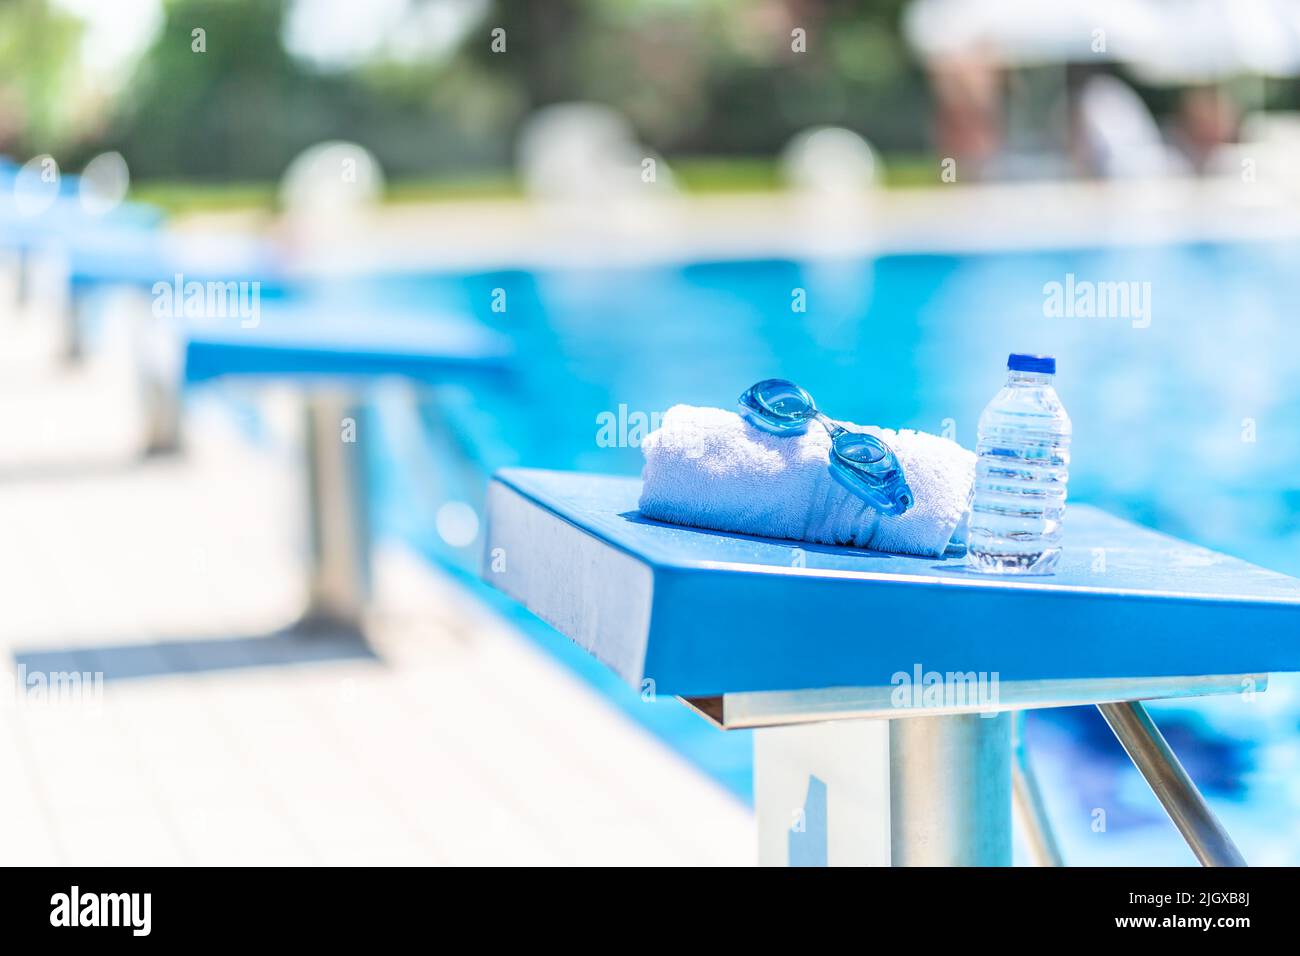 Swimming goggles, towel and water bottle placed on the starting bridge by the swimming pool. Stock Photo